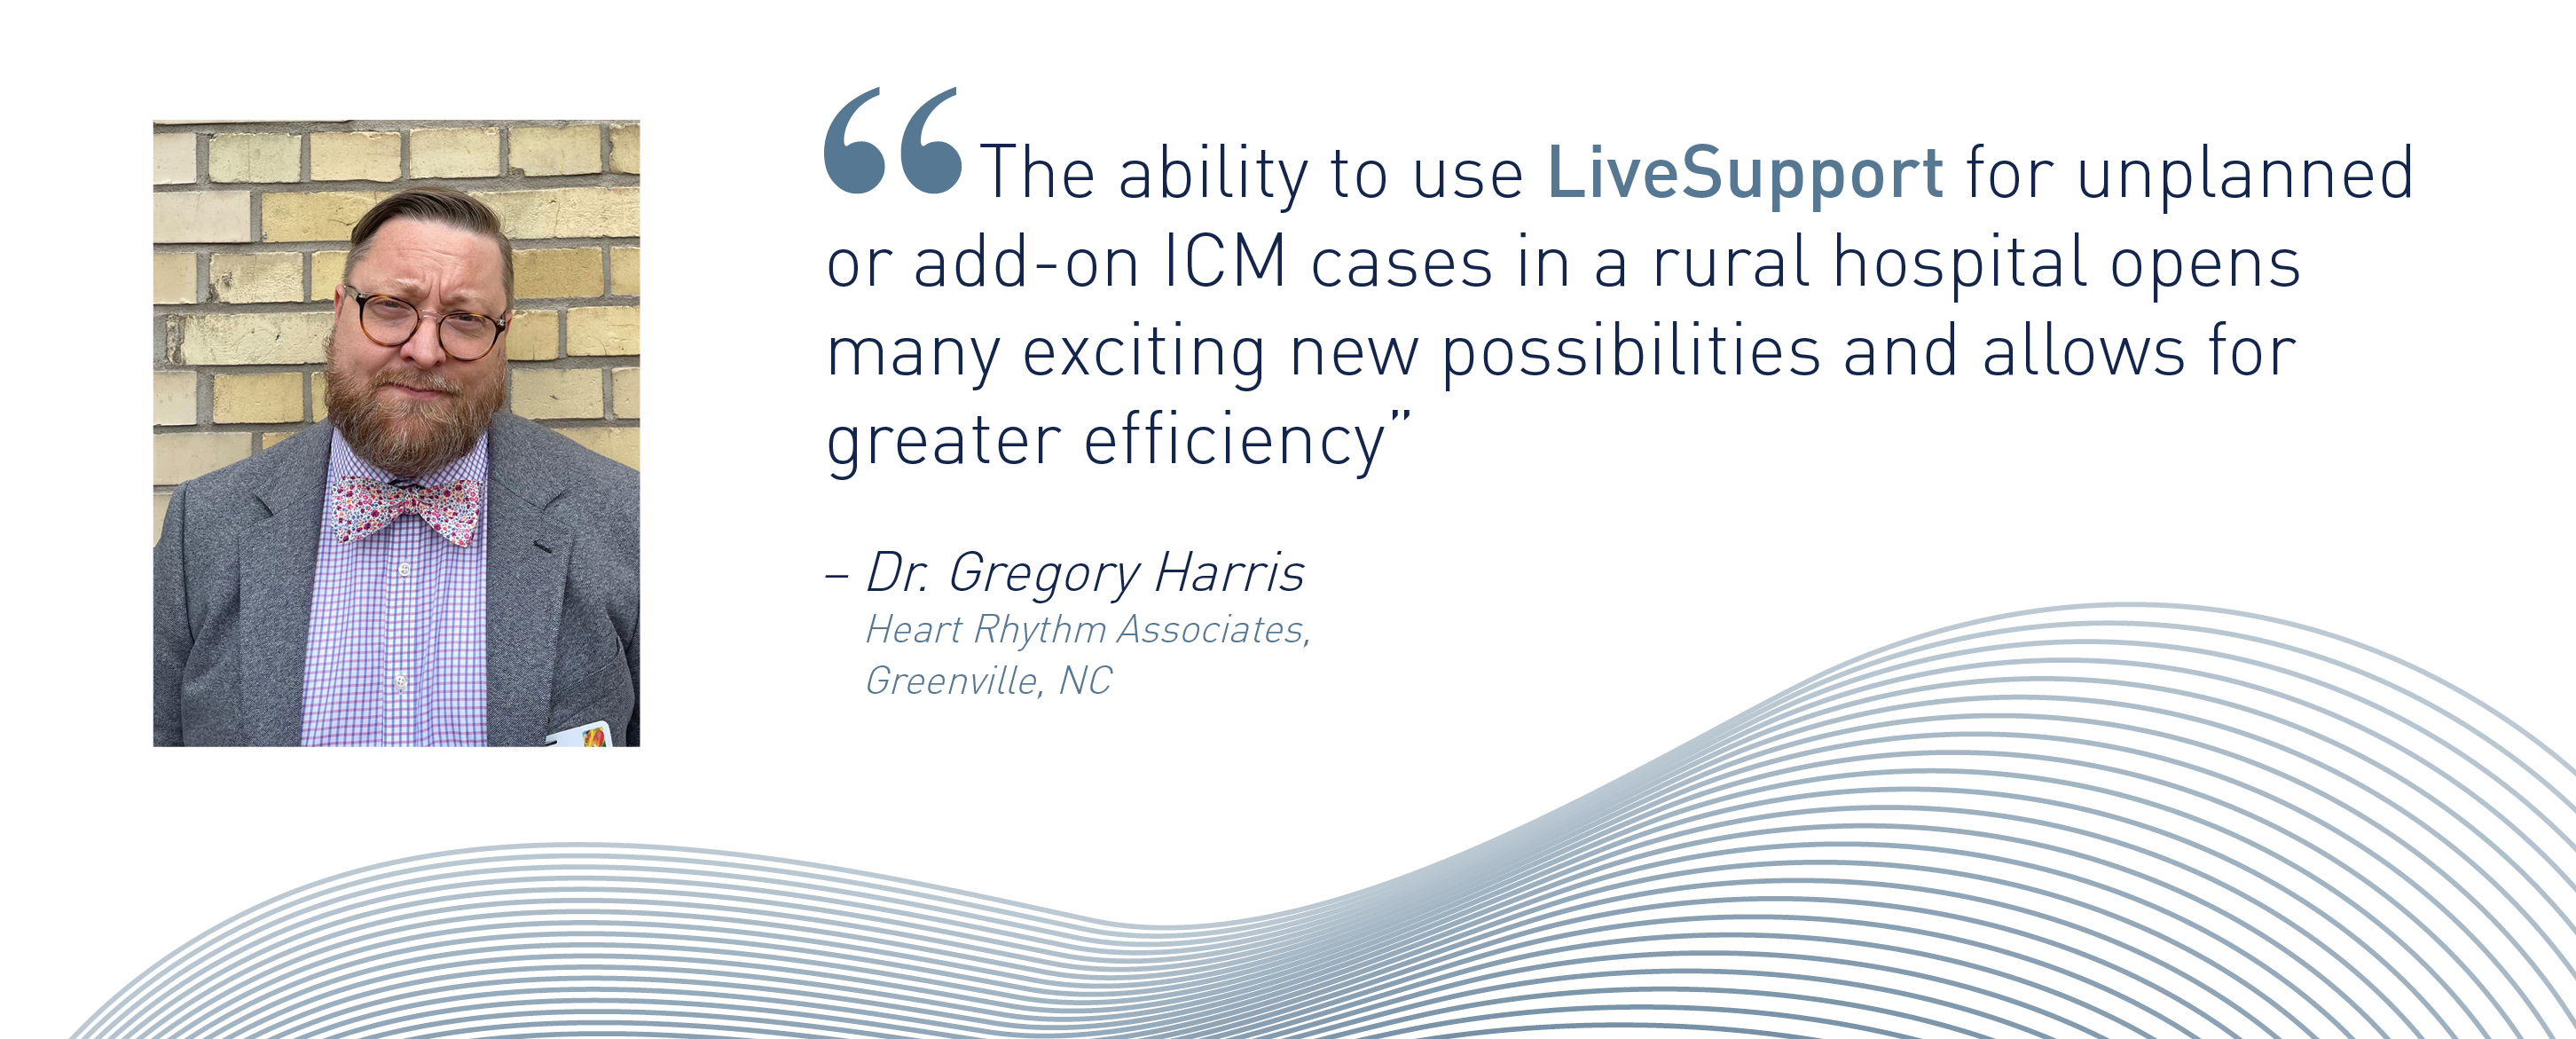 Dr Gregory Harris sees potential for LiveSupport in rural hospitals